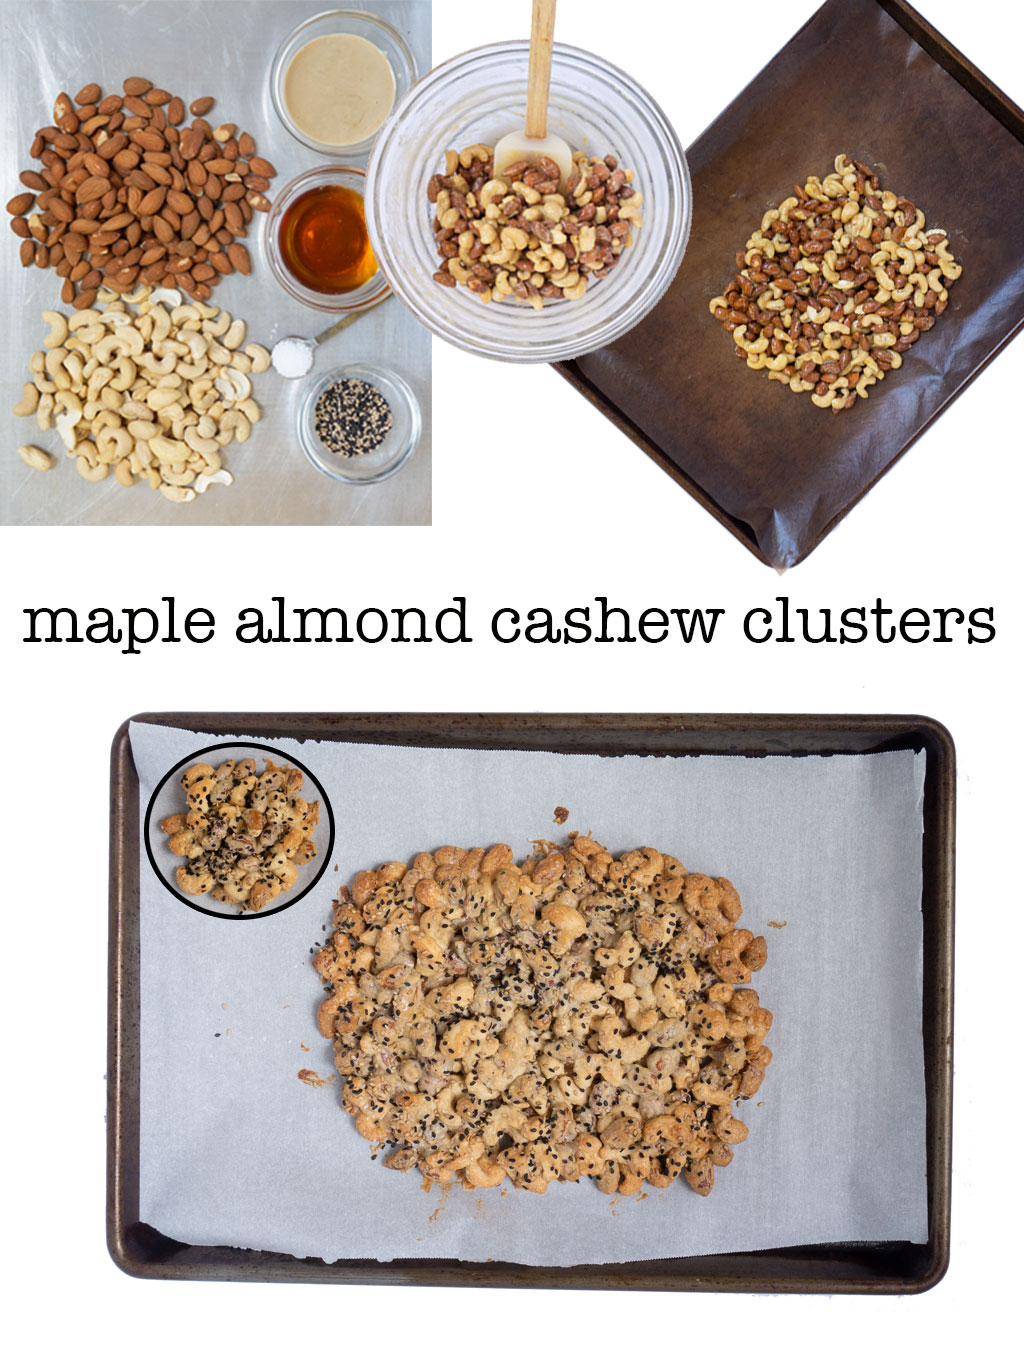 Step by Step Photos for how to Make Maple Almond Cashew Clusters